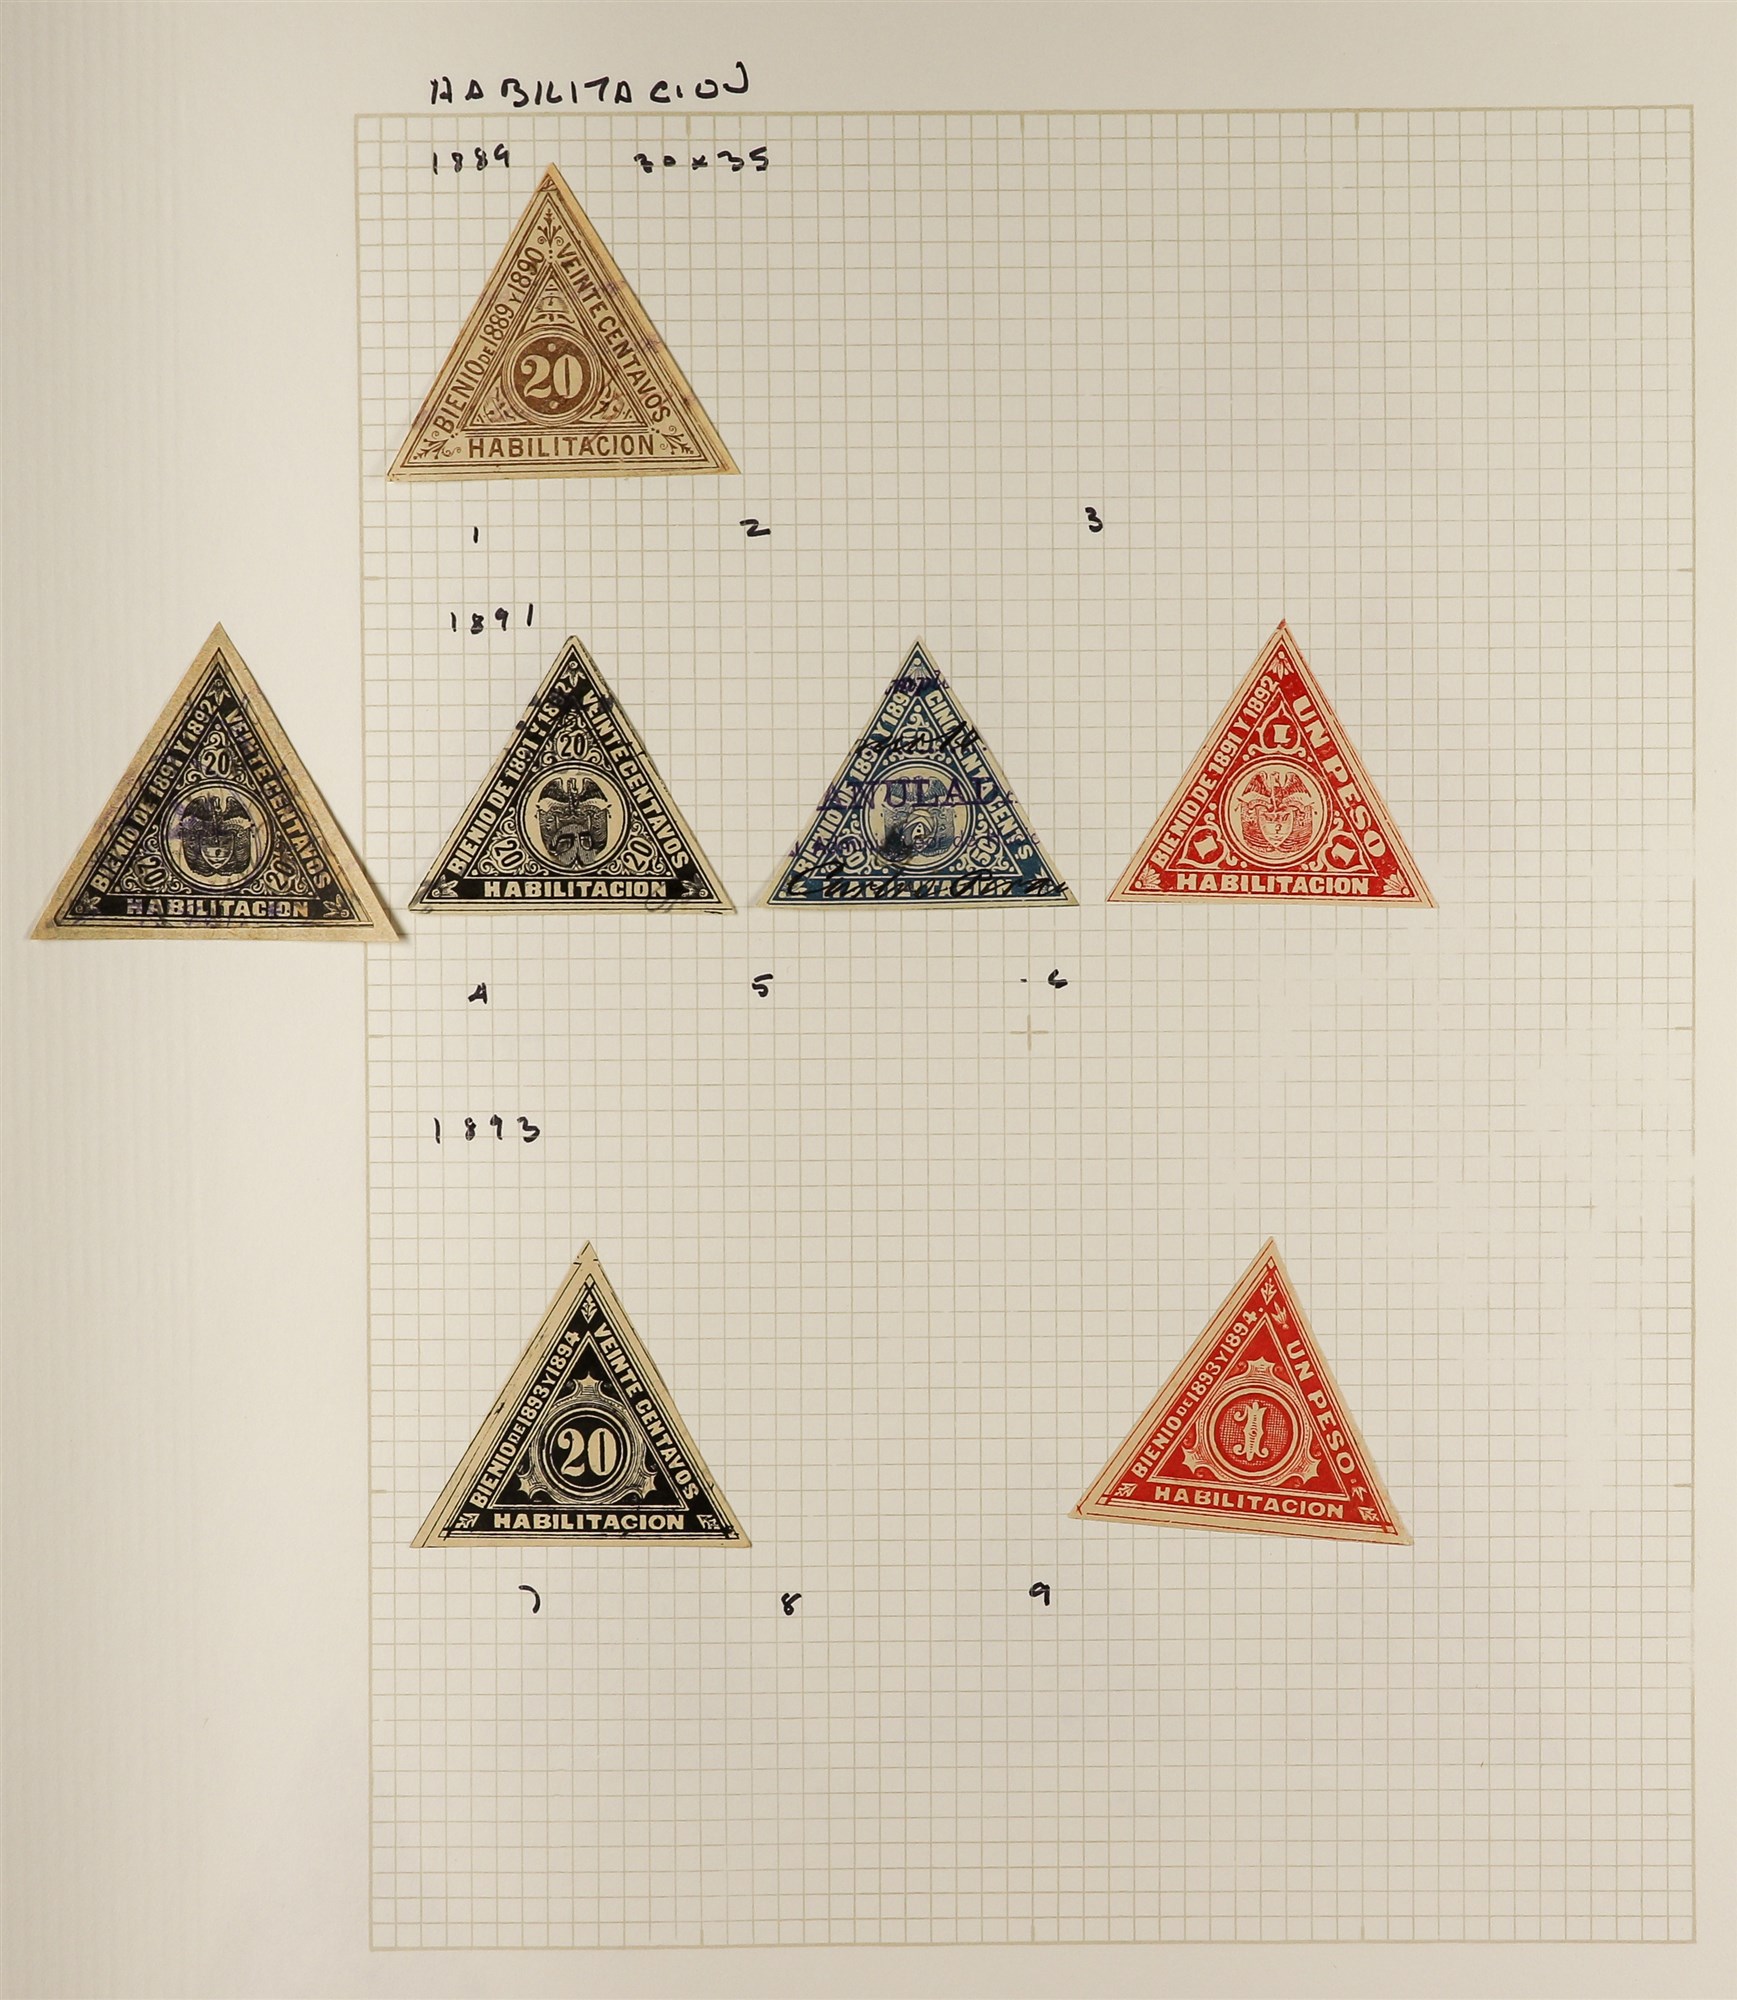 COLOMBIA REVENUE STAMPS COLLECTION largely 19th century issues on pages and in packets, incl. Timbre - Image 8 of 10